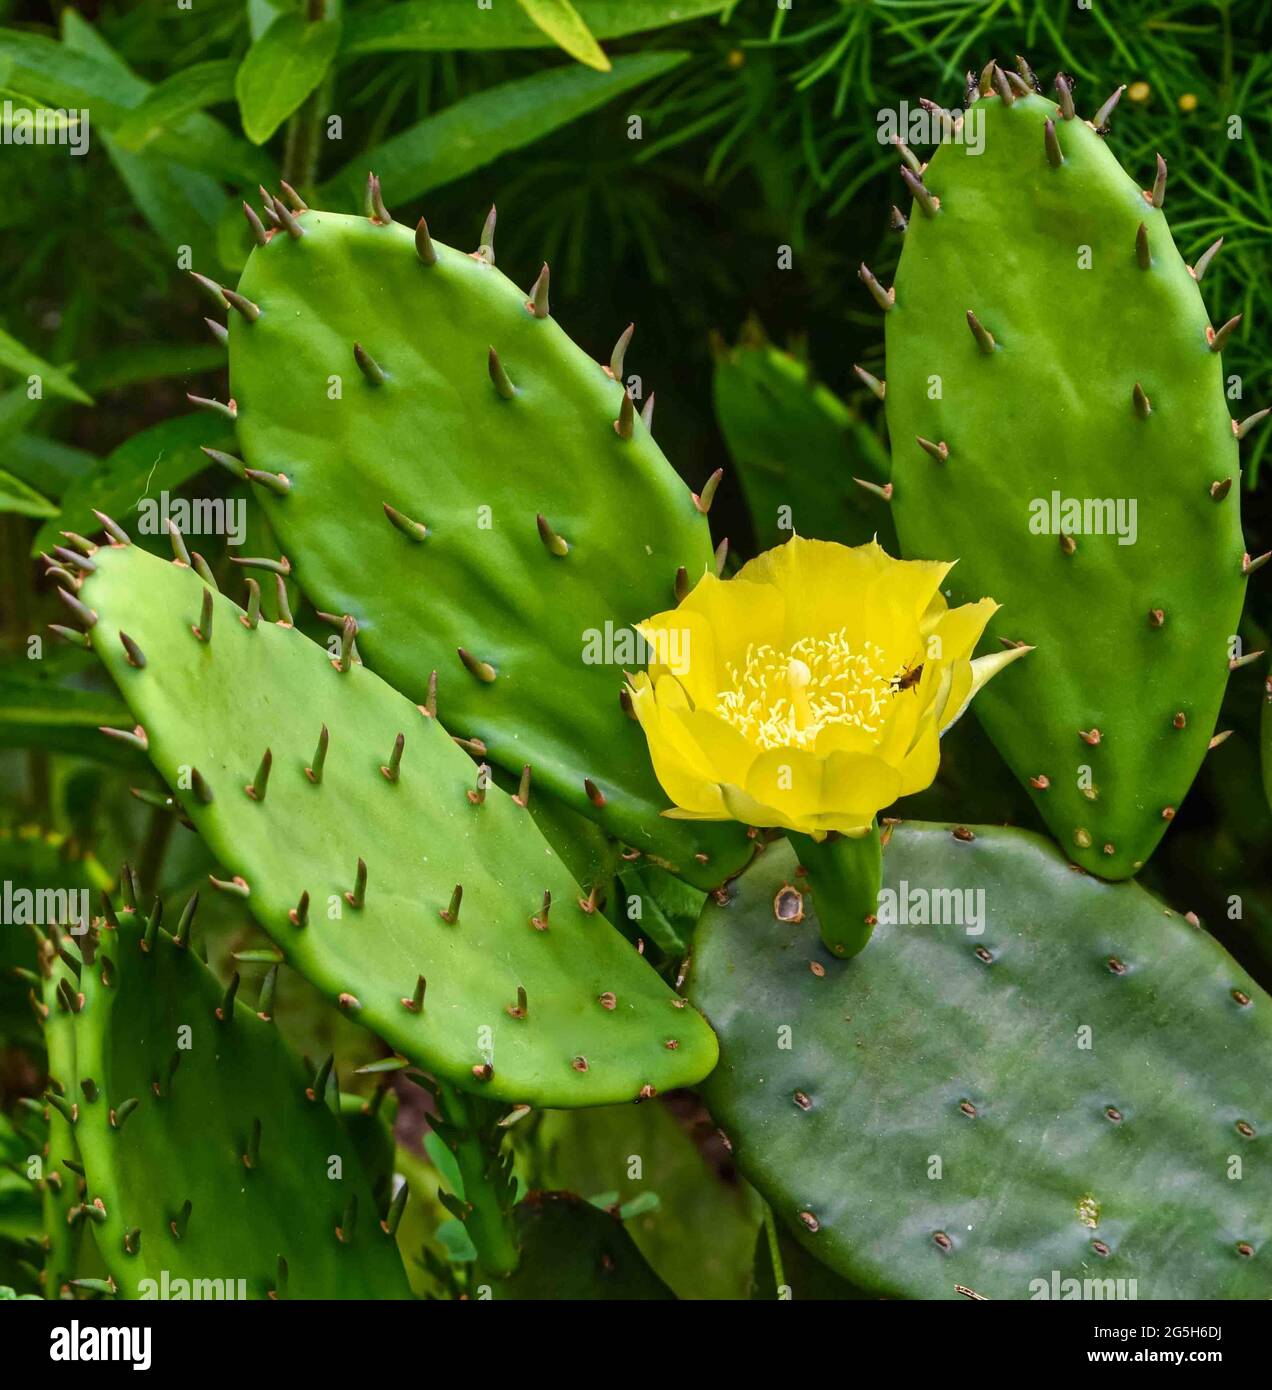 Full view of the yellow flower and spiny pads of the Eastern Prickly Pear Cactus (Opuntia humifusa) with pollinator in flower. Stock Photo